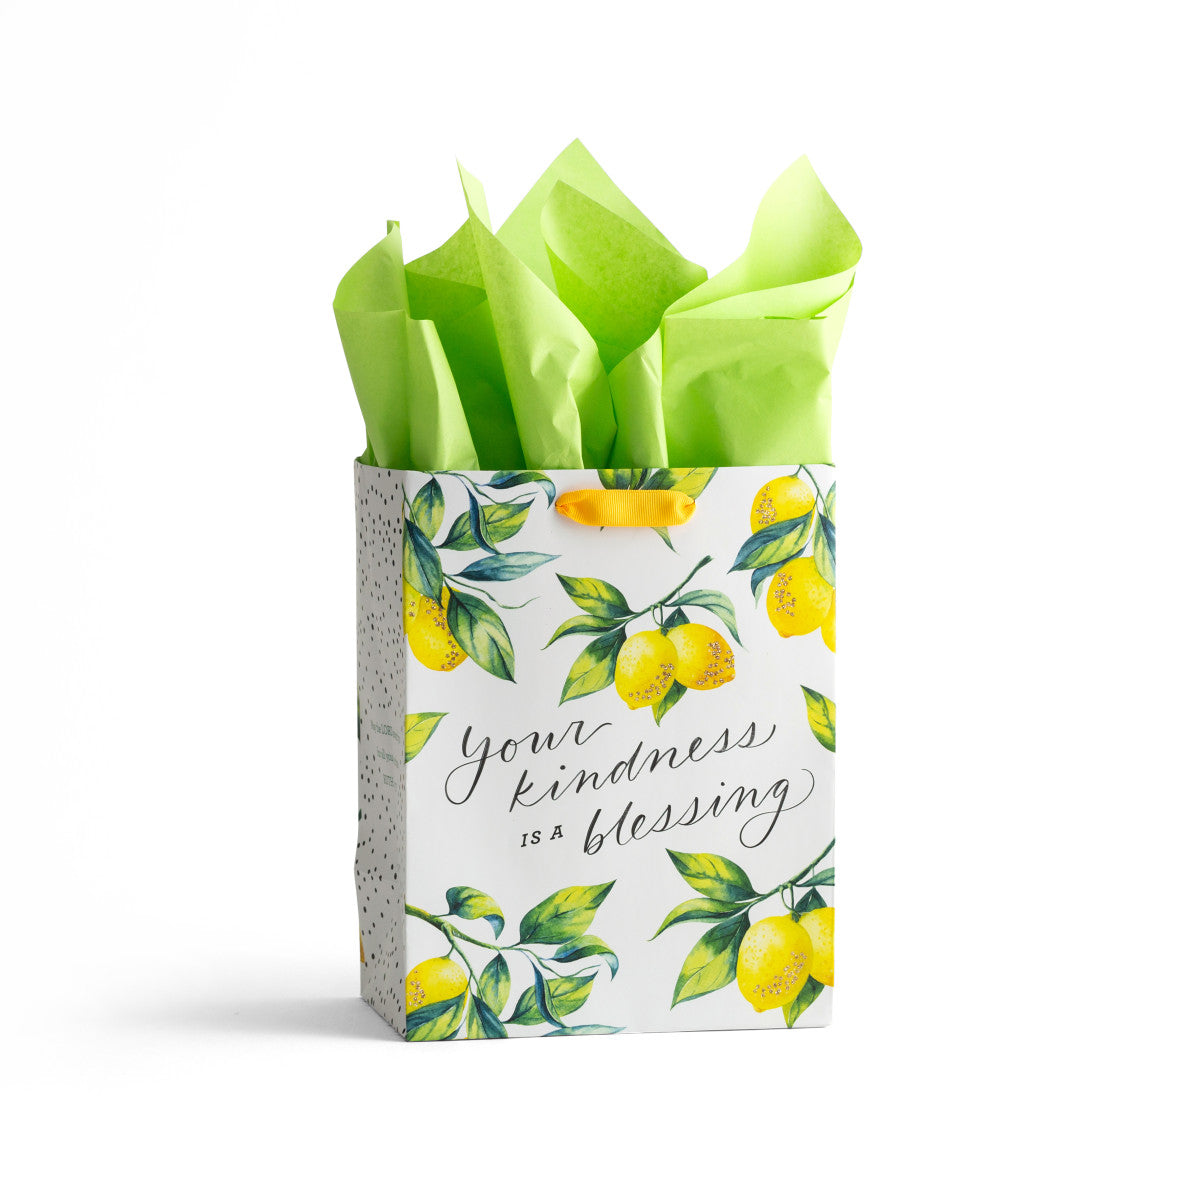 Kindness is a Blessing - Lemons - Medium Gift Bag with Tissue - The Christian Gift Company